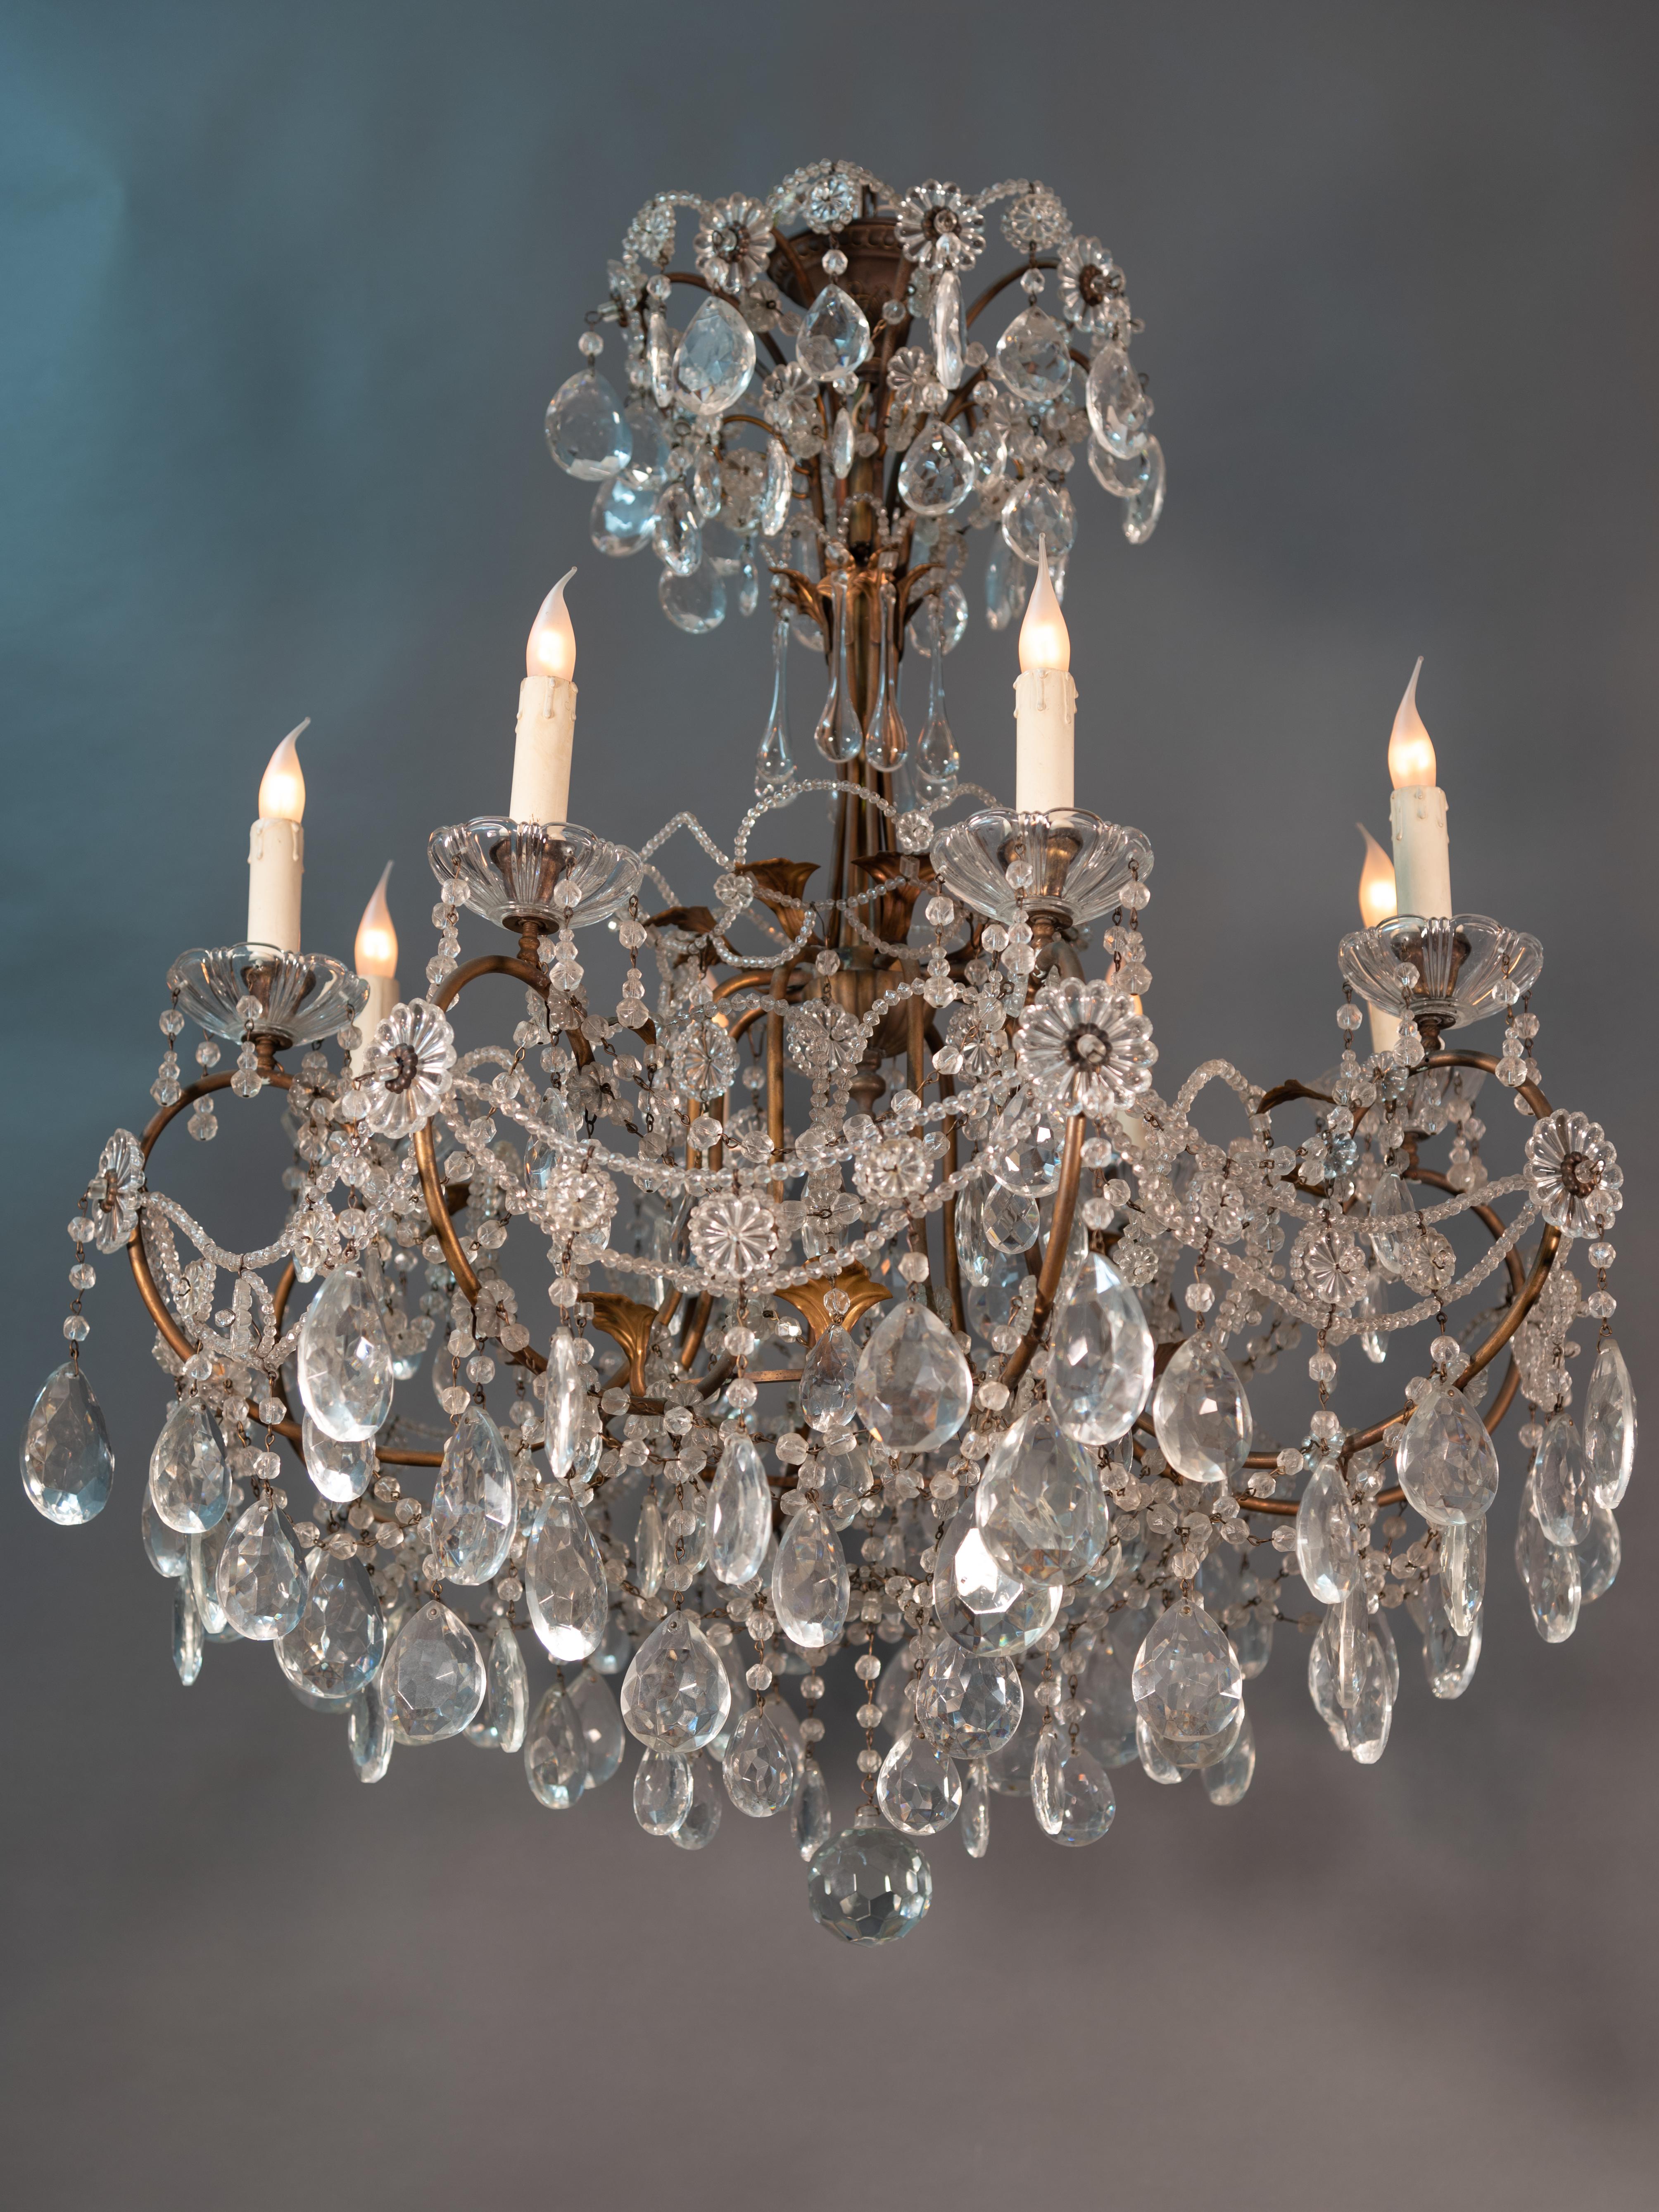 This chandelier feature a cascade of tear-drops, roses, festoons, chains of pearls, sequins, and crystals, making them decor pieces of peerless elegance, splendor, and glamor.
Completely original in all his pieces, is in an exceptional state of